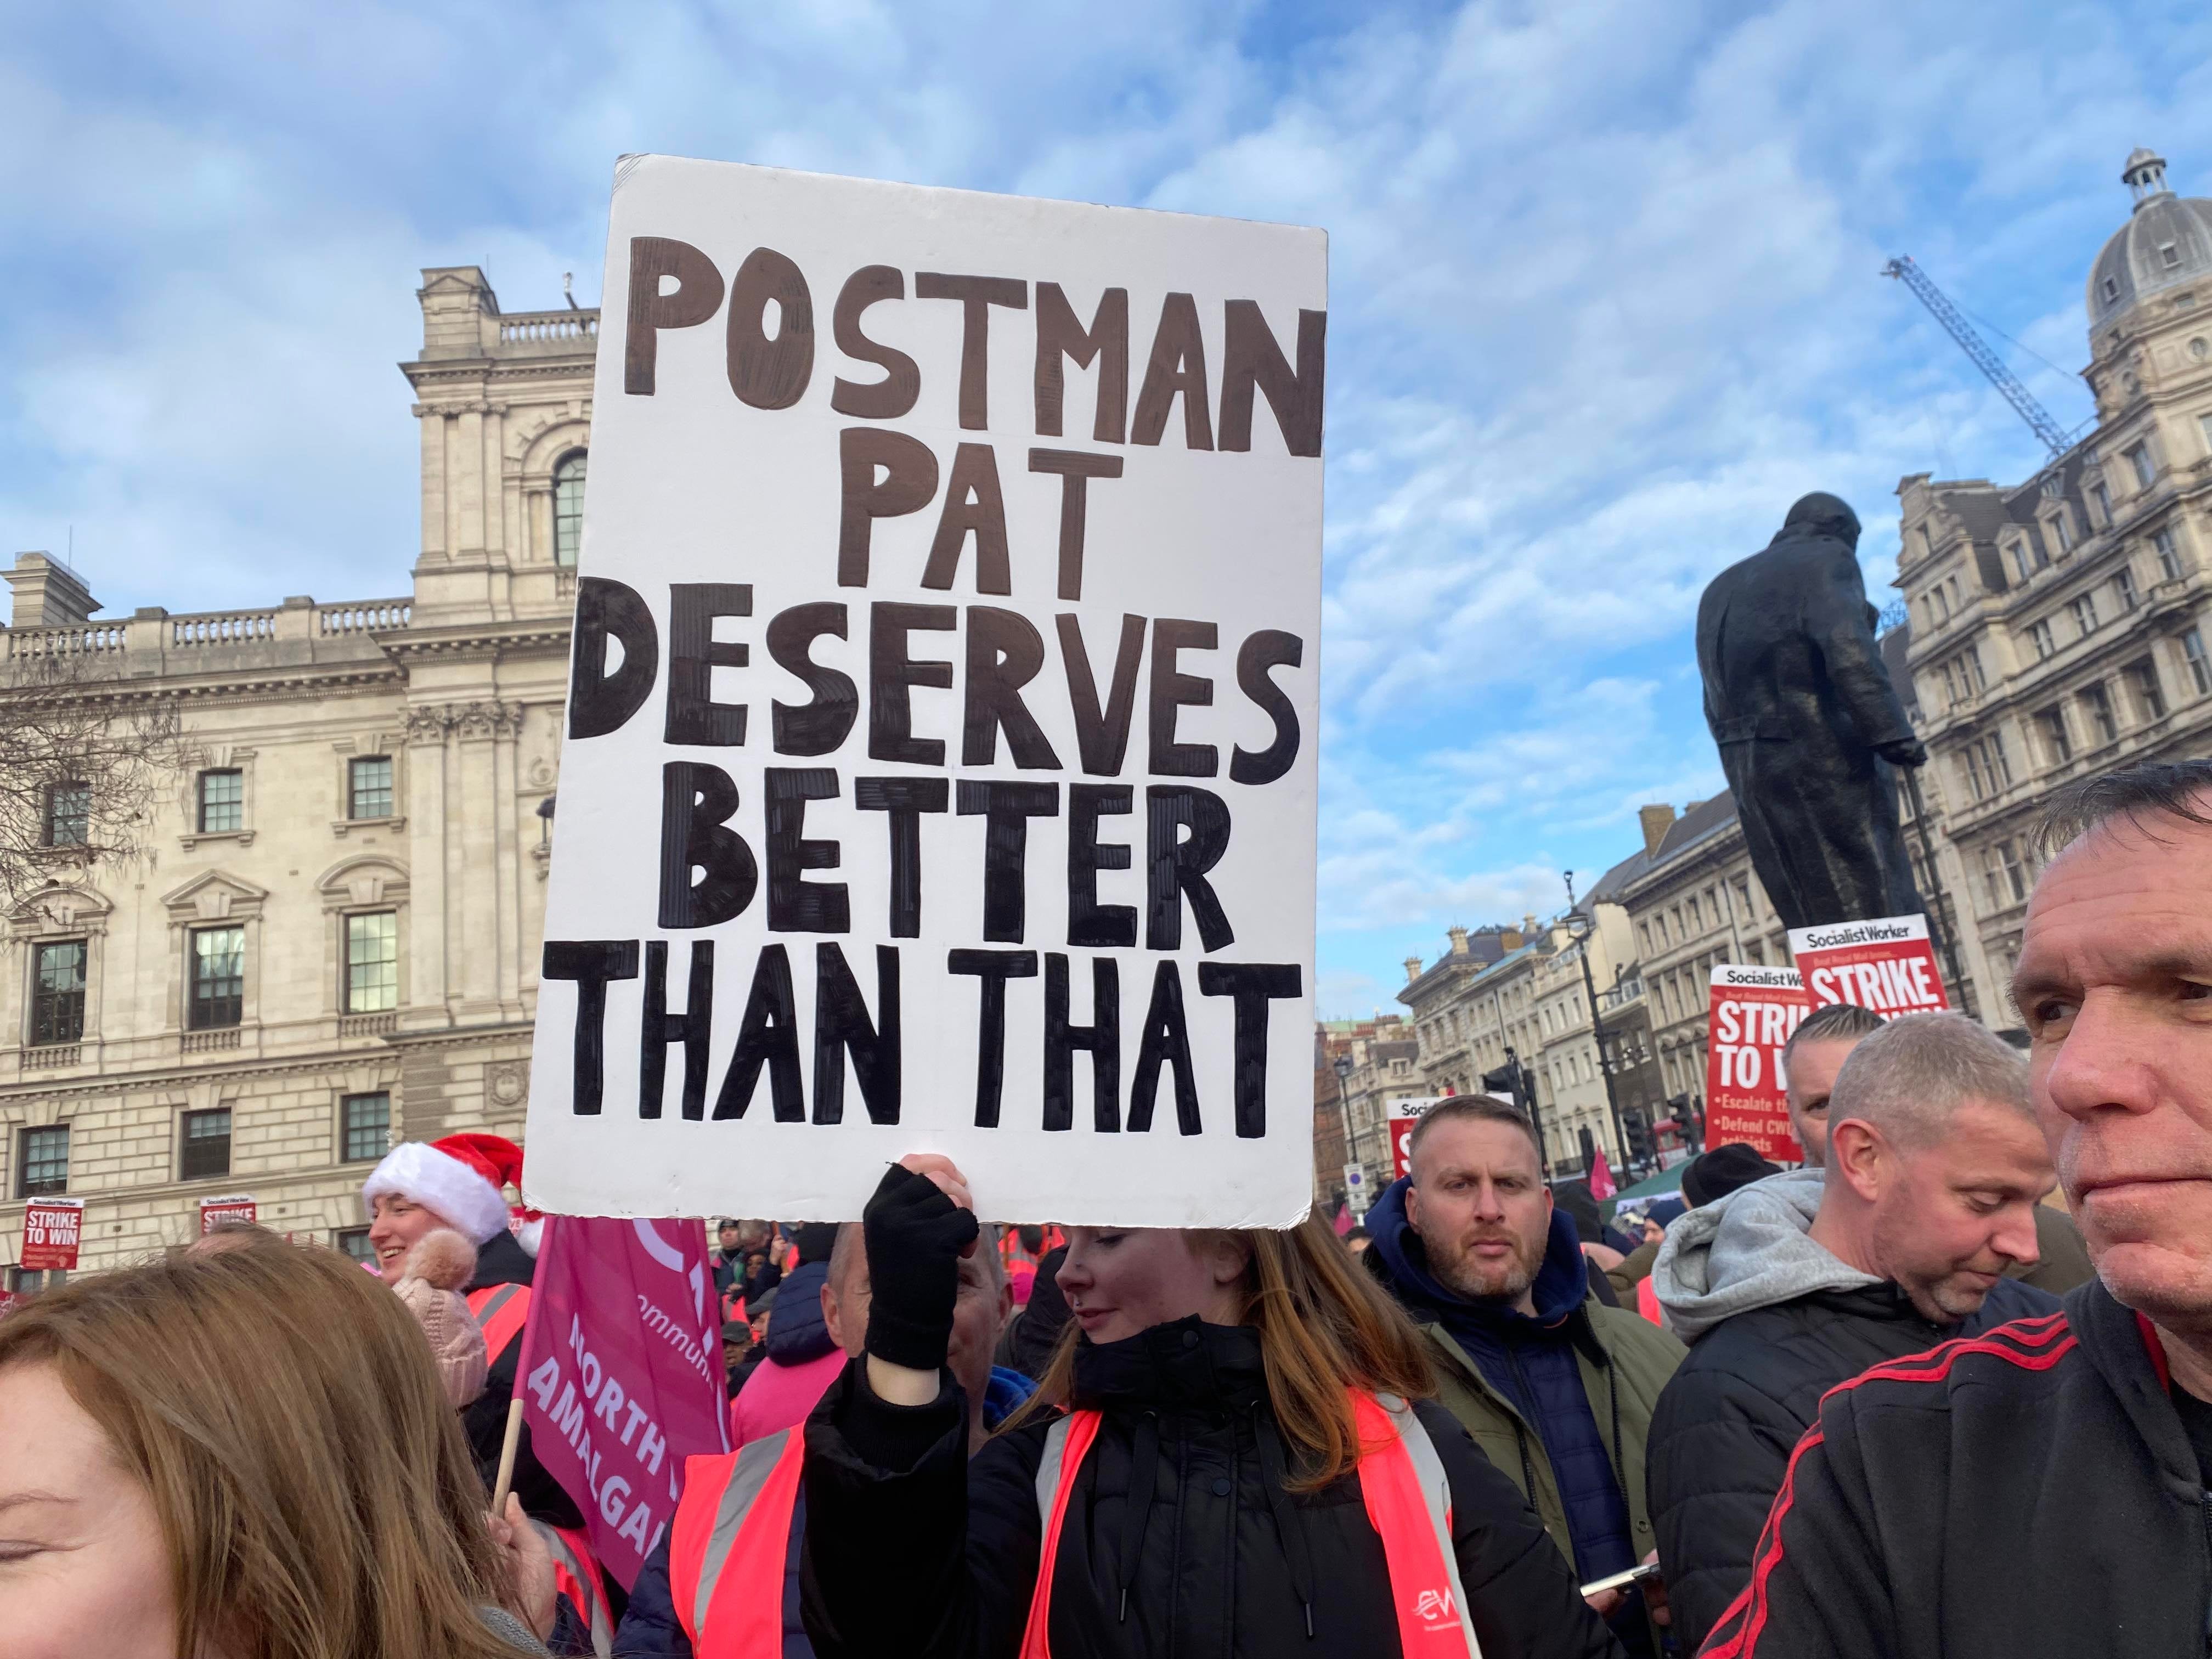 Striking postal workers hold placard reading ‘Postman Pat deserves better than that’ at Parliament Square rally